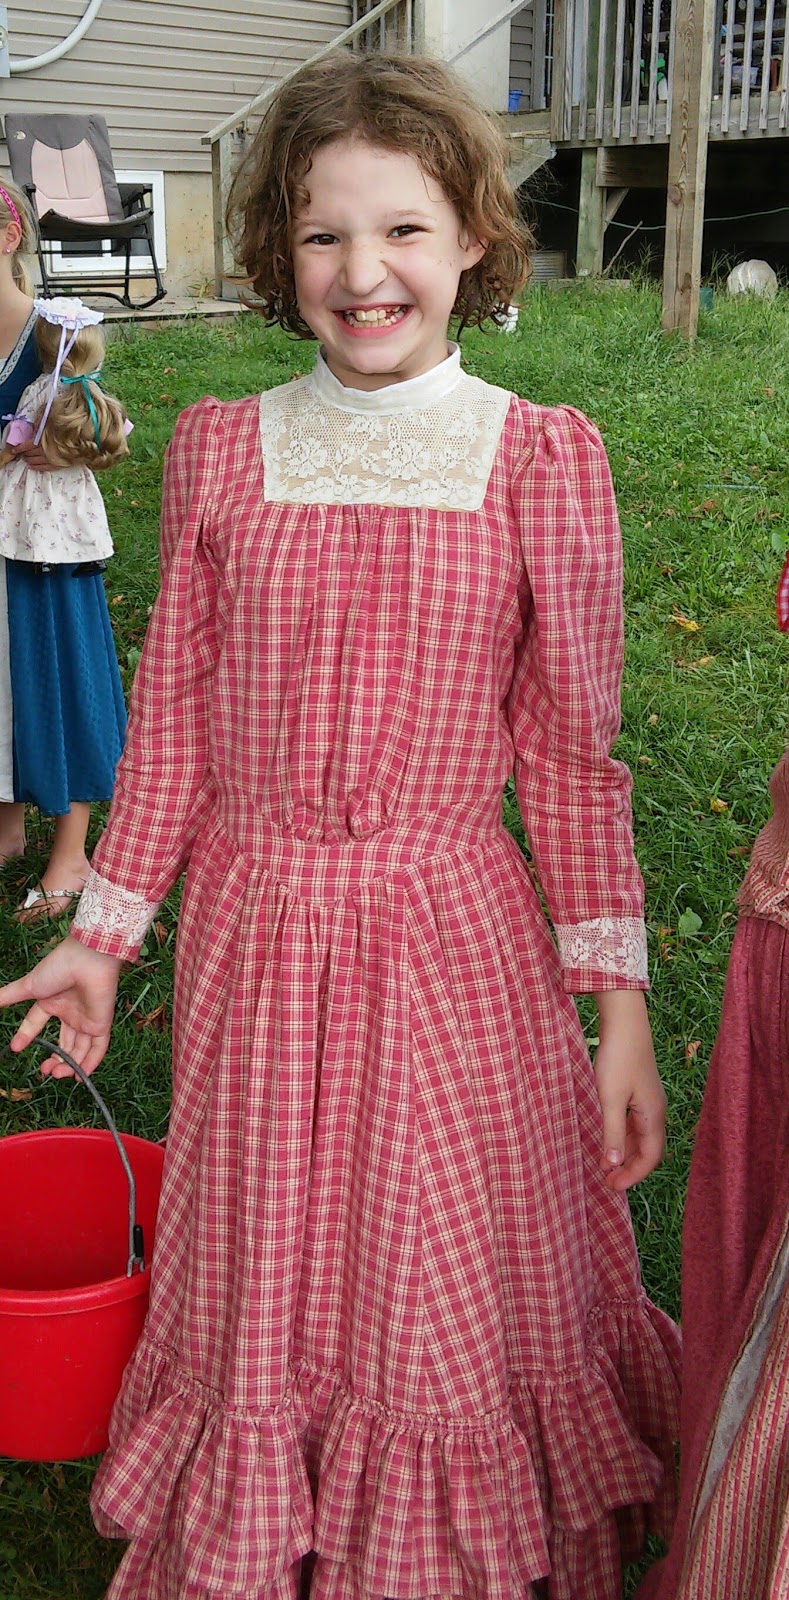 The Sewing Goatherd: My Sister's Much Worn Pink Plaid 1890's Dress